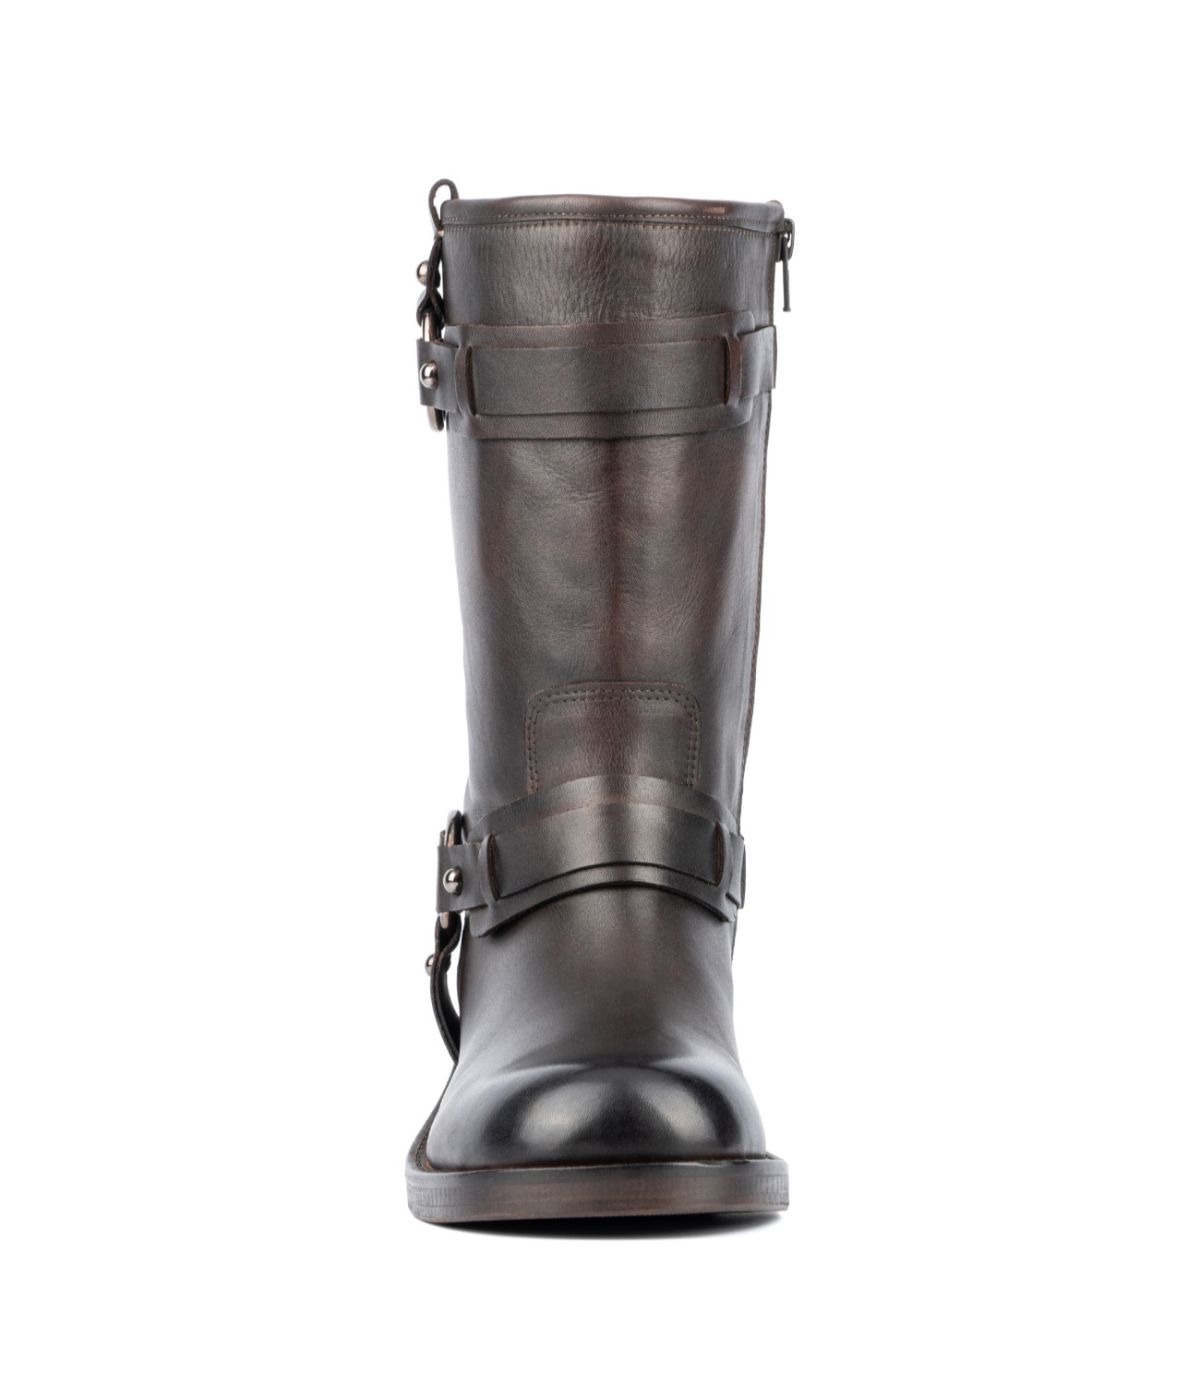 Vintage Foundry Co. Women's Augusta Mid Calf Boots Chocolate